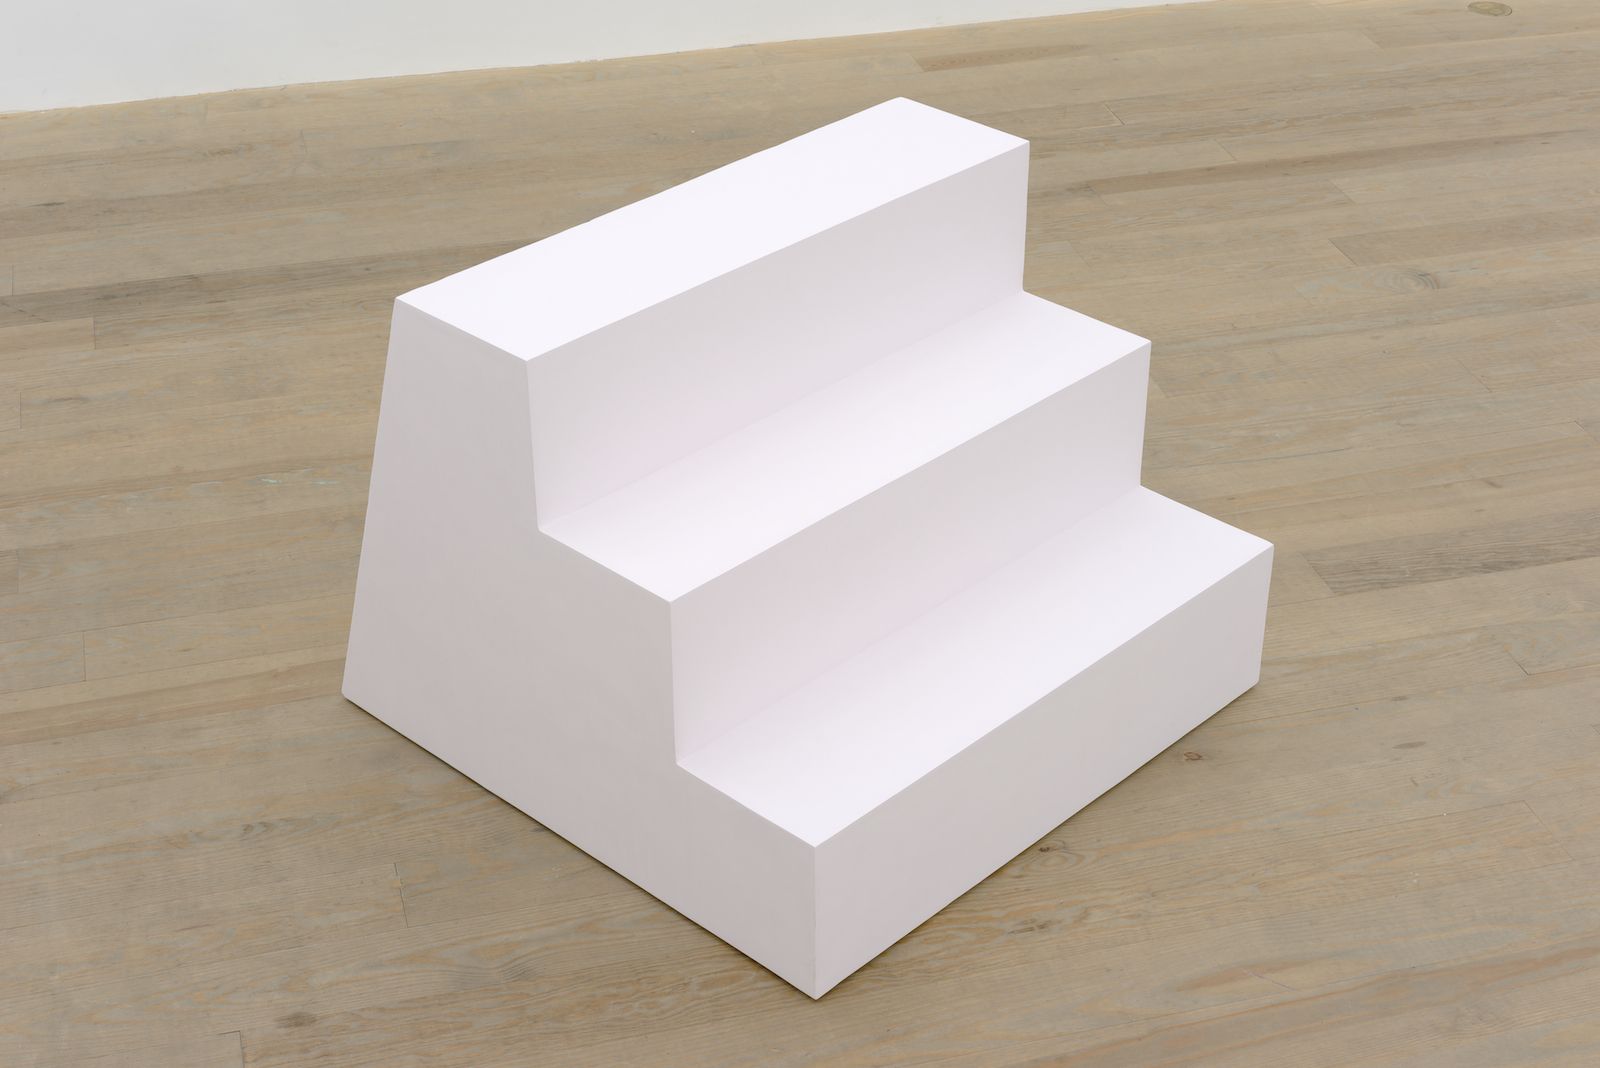 Gordon Hall, Stair, 2014, pigmented joint compound, wood, tile, grout, 27 1⁄2 × 36 × 36 in.